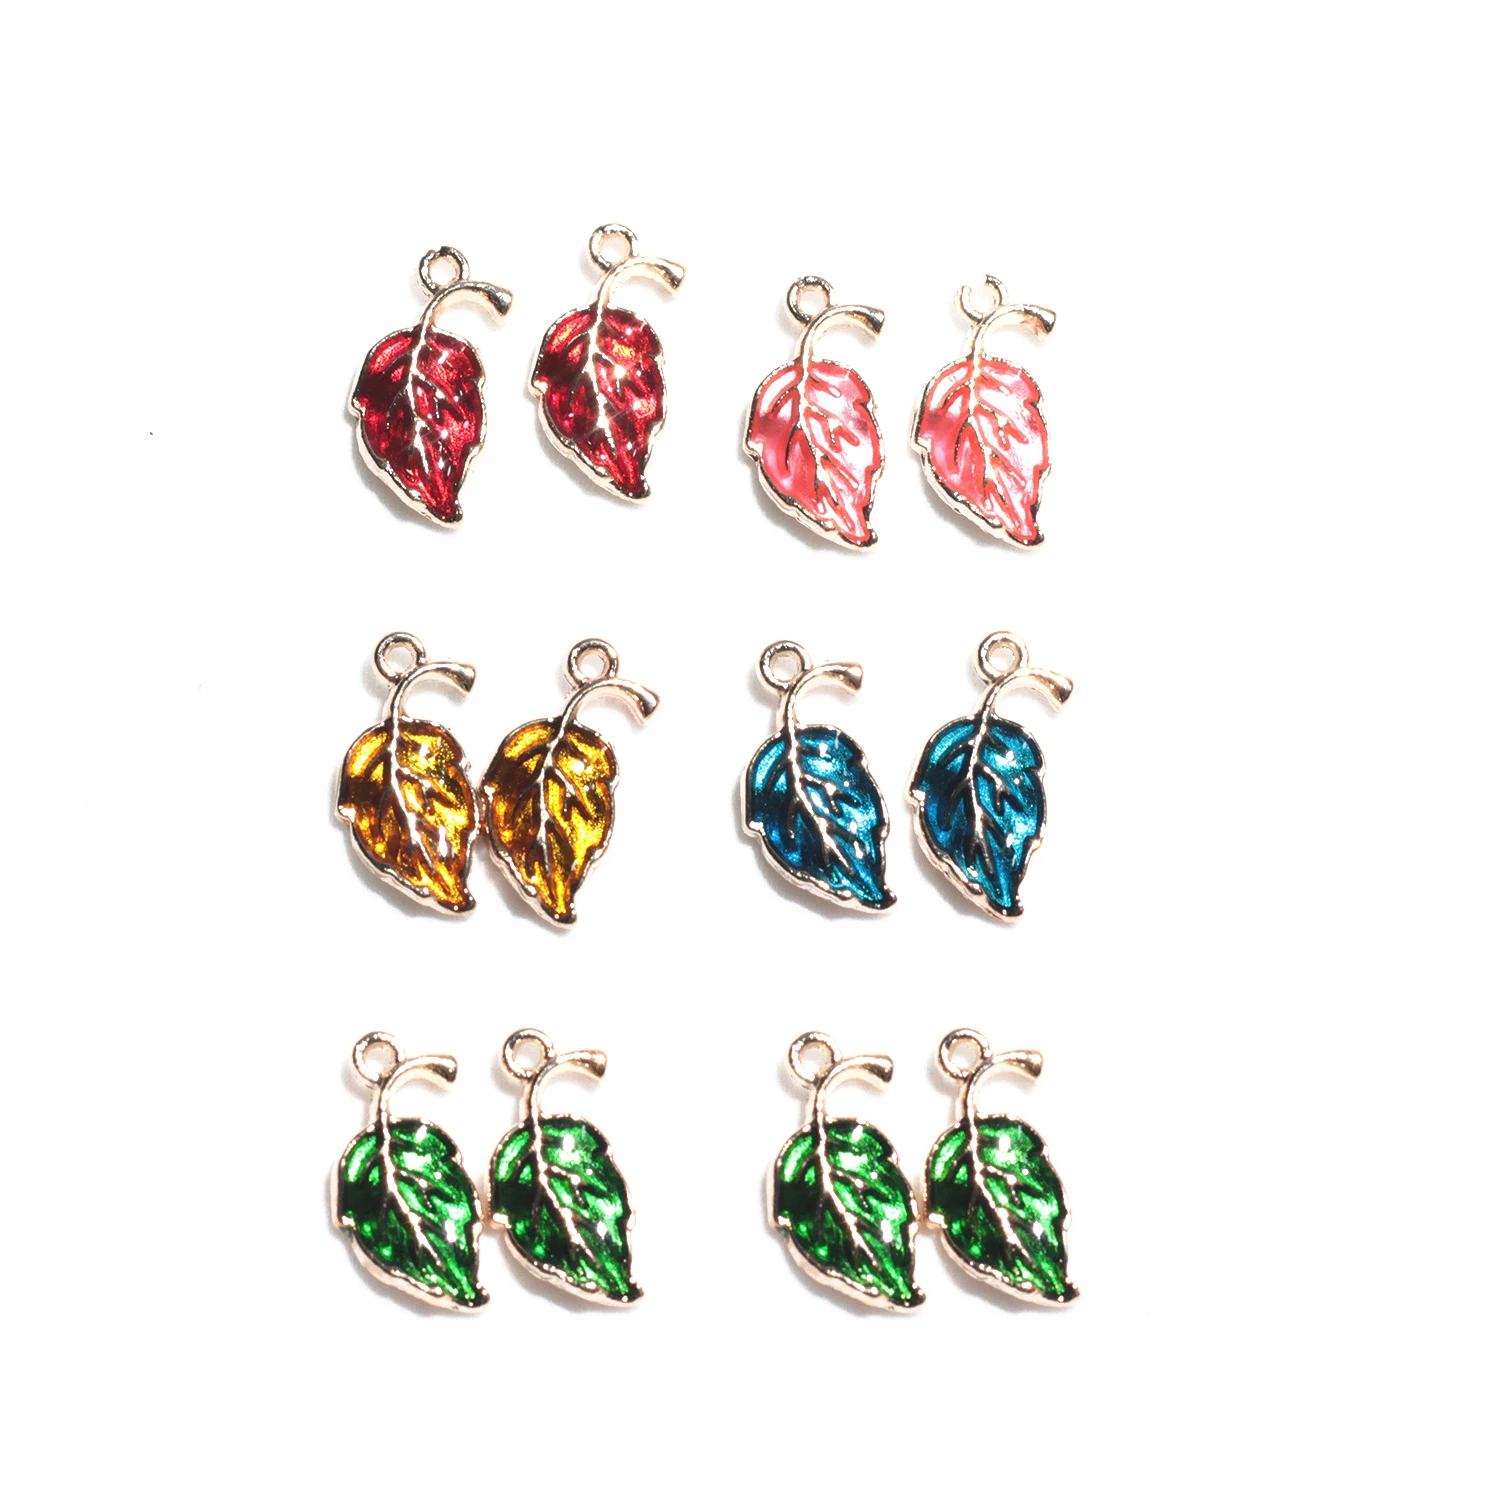 

Mixed 10pcs Enamel Colors Tree Leaf Charms Pendants Handmade Earrings Neacklace Leaves Charm Crafting Jewelry Making